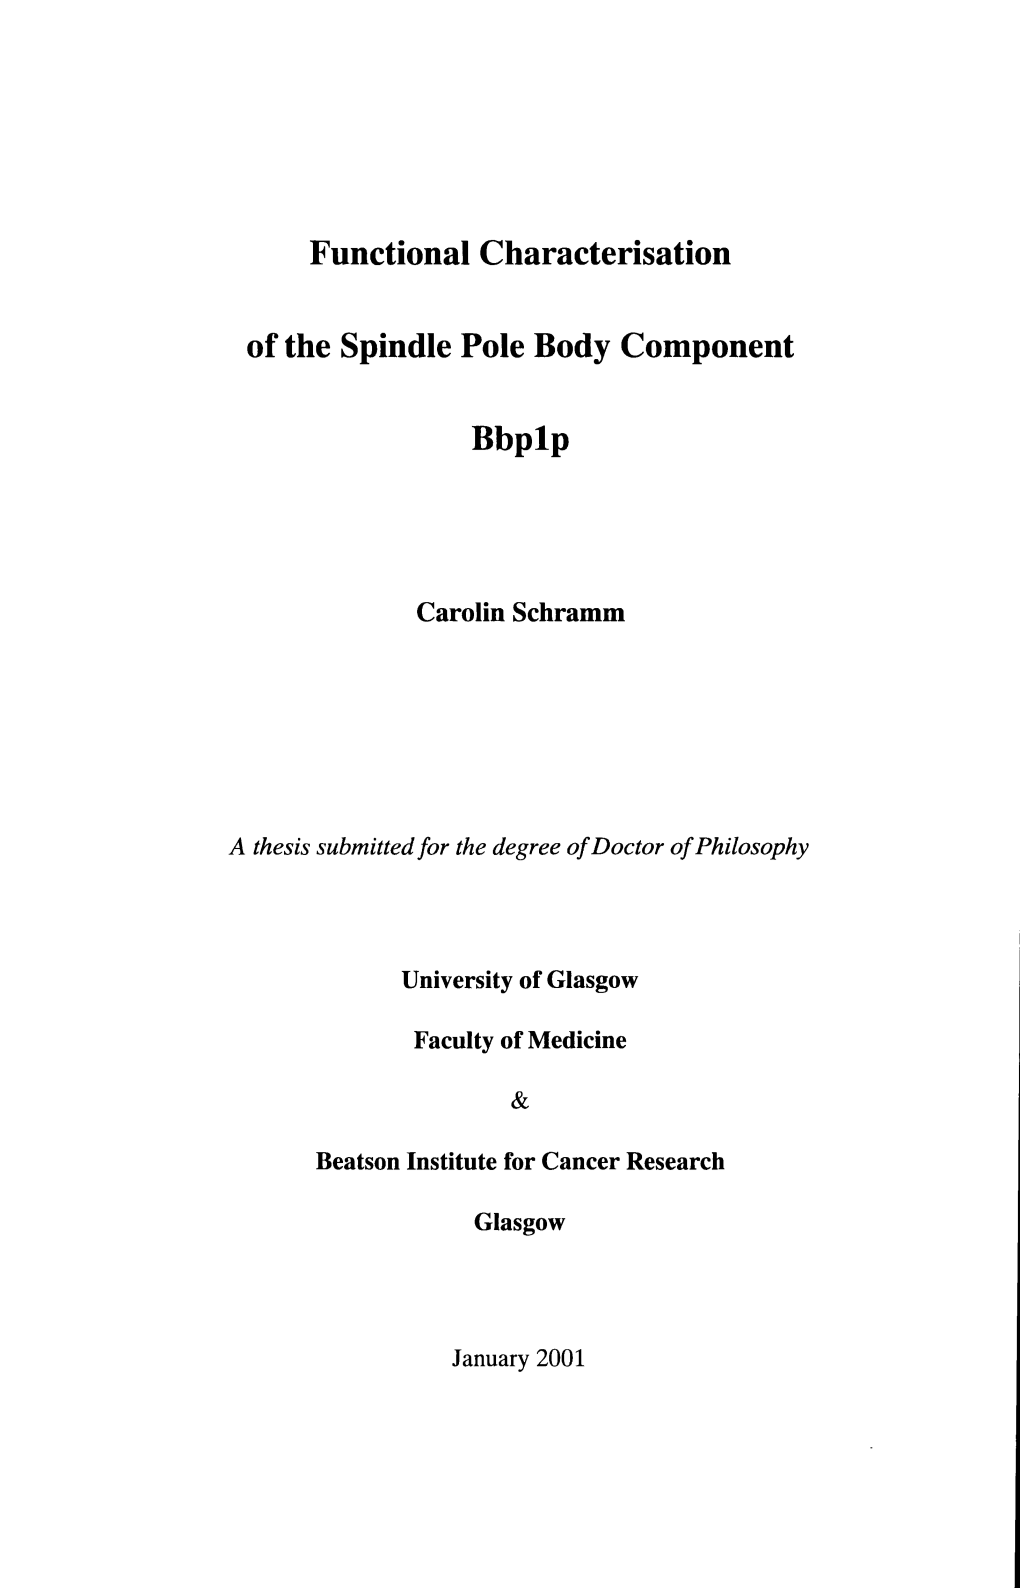 Functional Characterisation of the Spindle Pole Body Component Bbplp